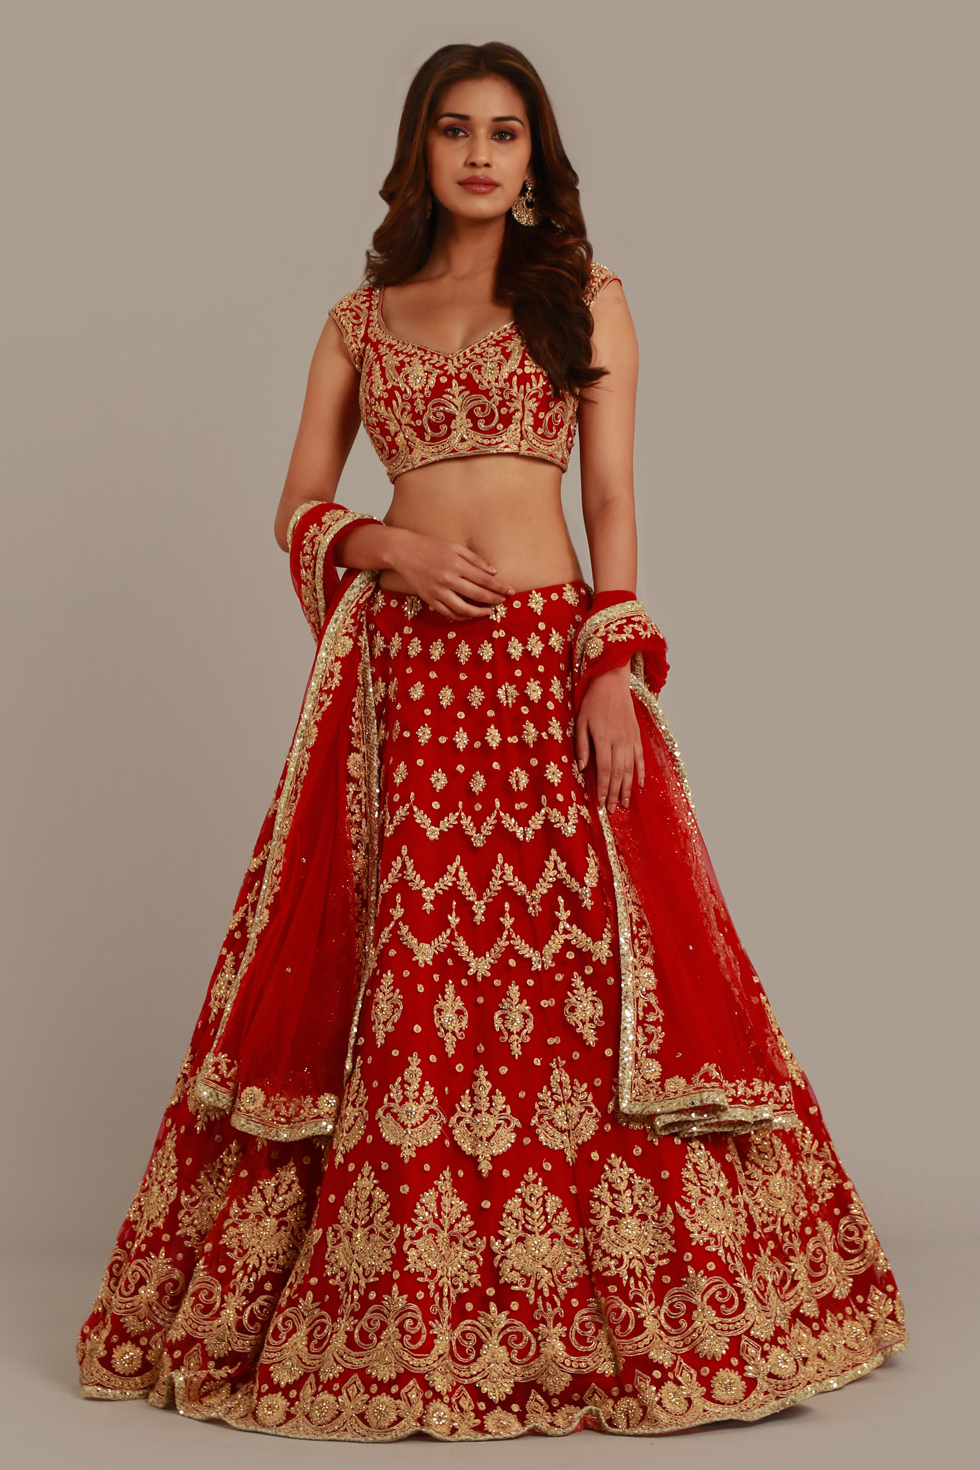 FIERY RED LEHENGA SET WITH MULTI COLOURED THREAD WORK AND SILVER HIGHLIGHTS  PAIRED WITH A CORSET CUT BLOUSE AND A MATCHING DUPATTA. - Seasons India